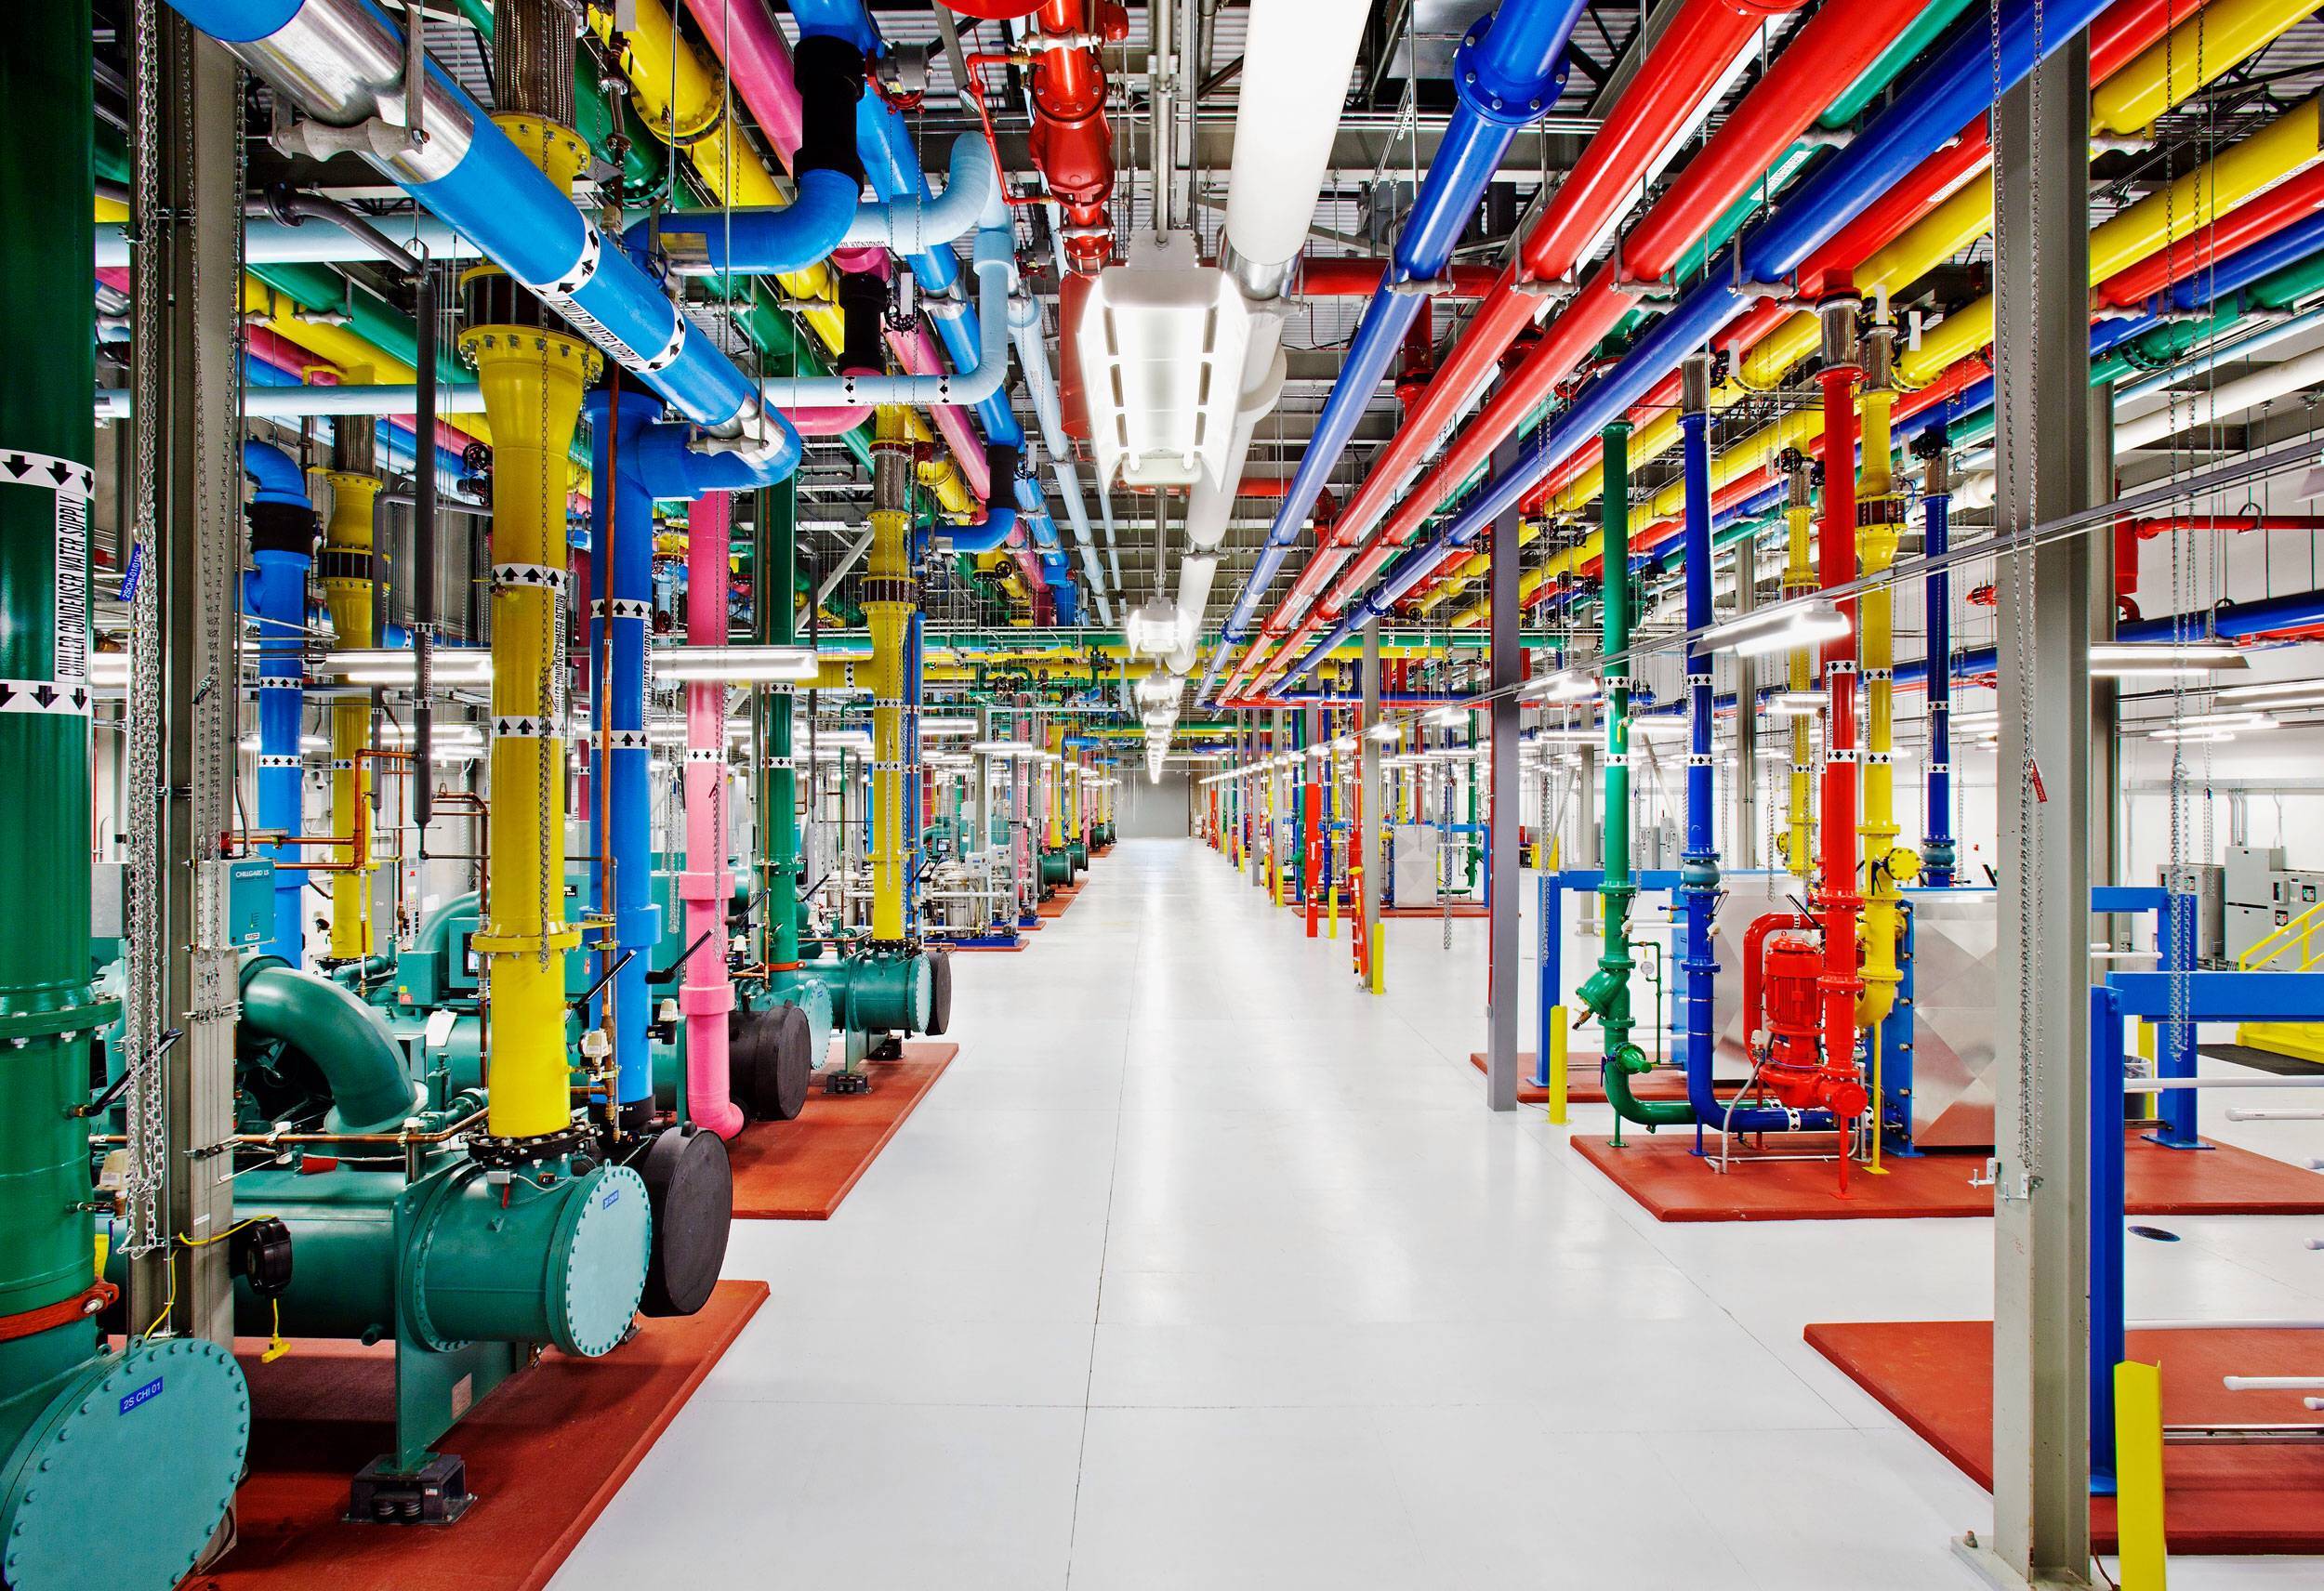 6. An inside view of one of Google’s data centers.